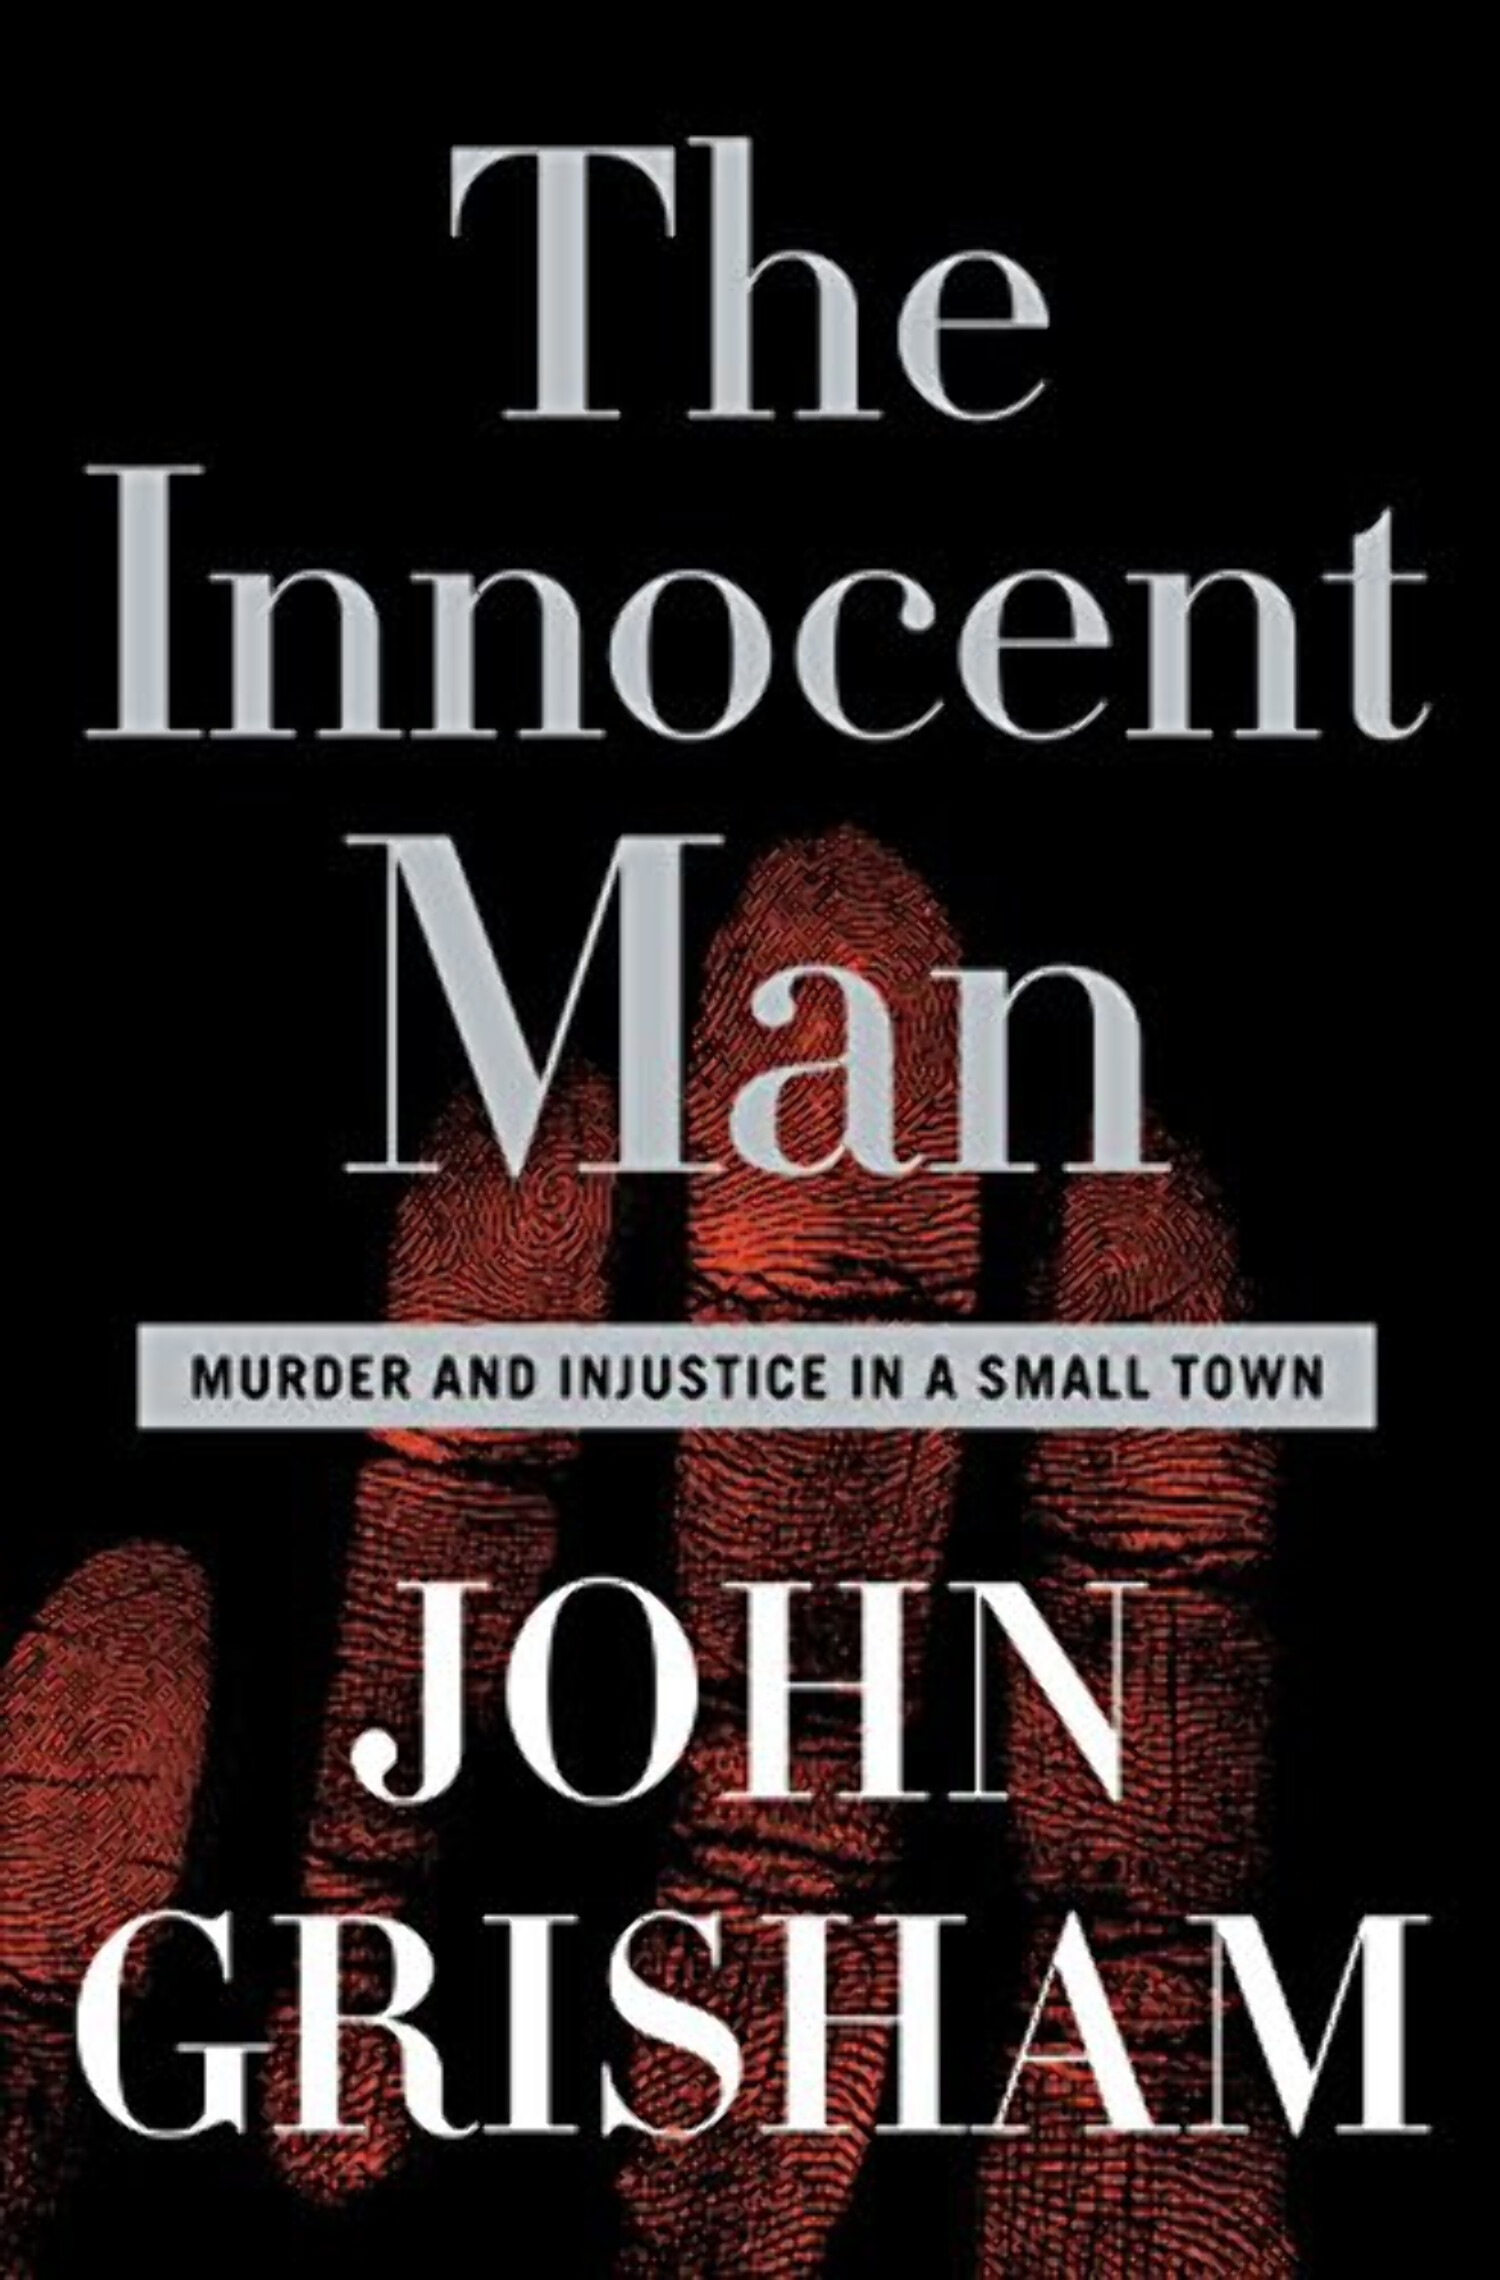 The Innocent Man : Murder and Injustice in a Small Town (Hardcover) - image 1 of 1